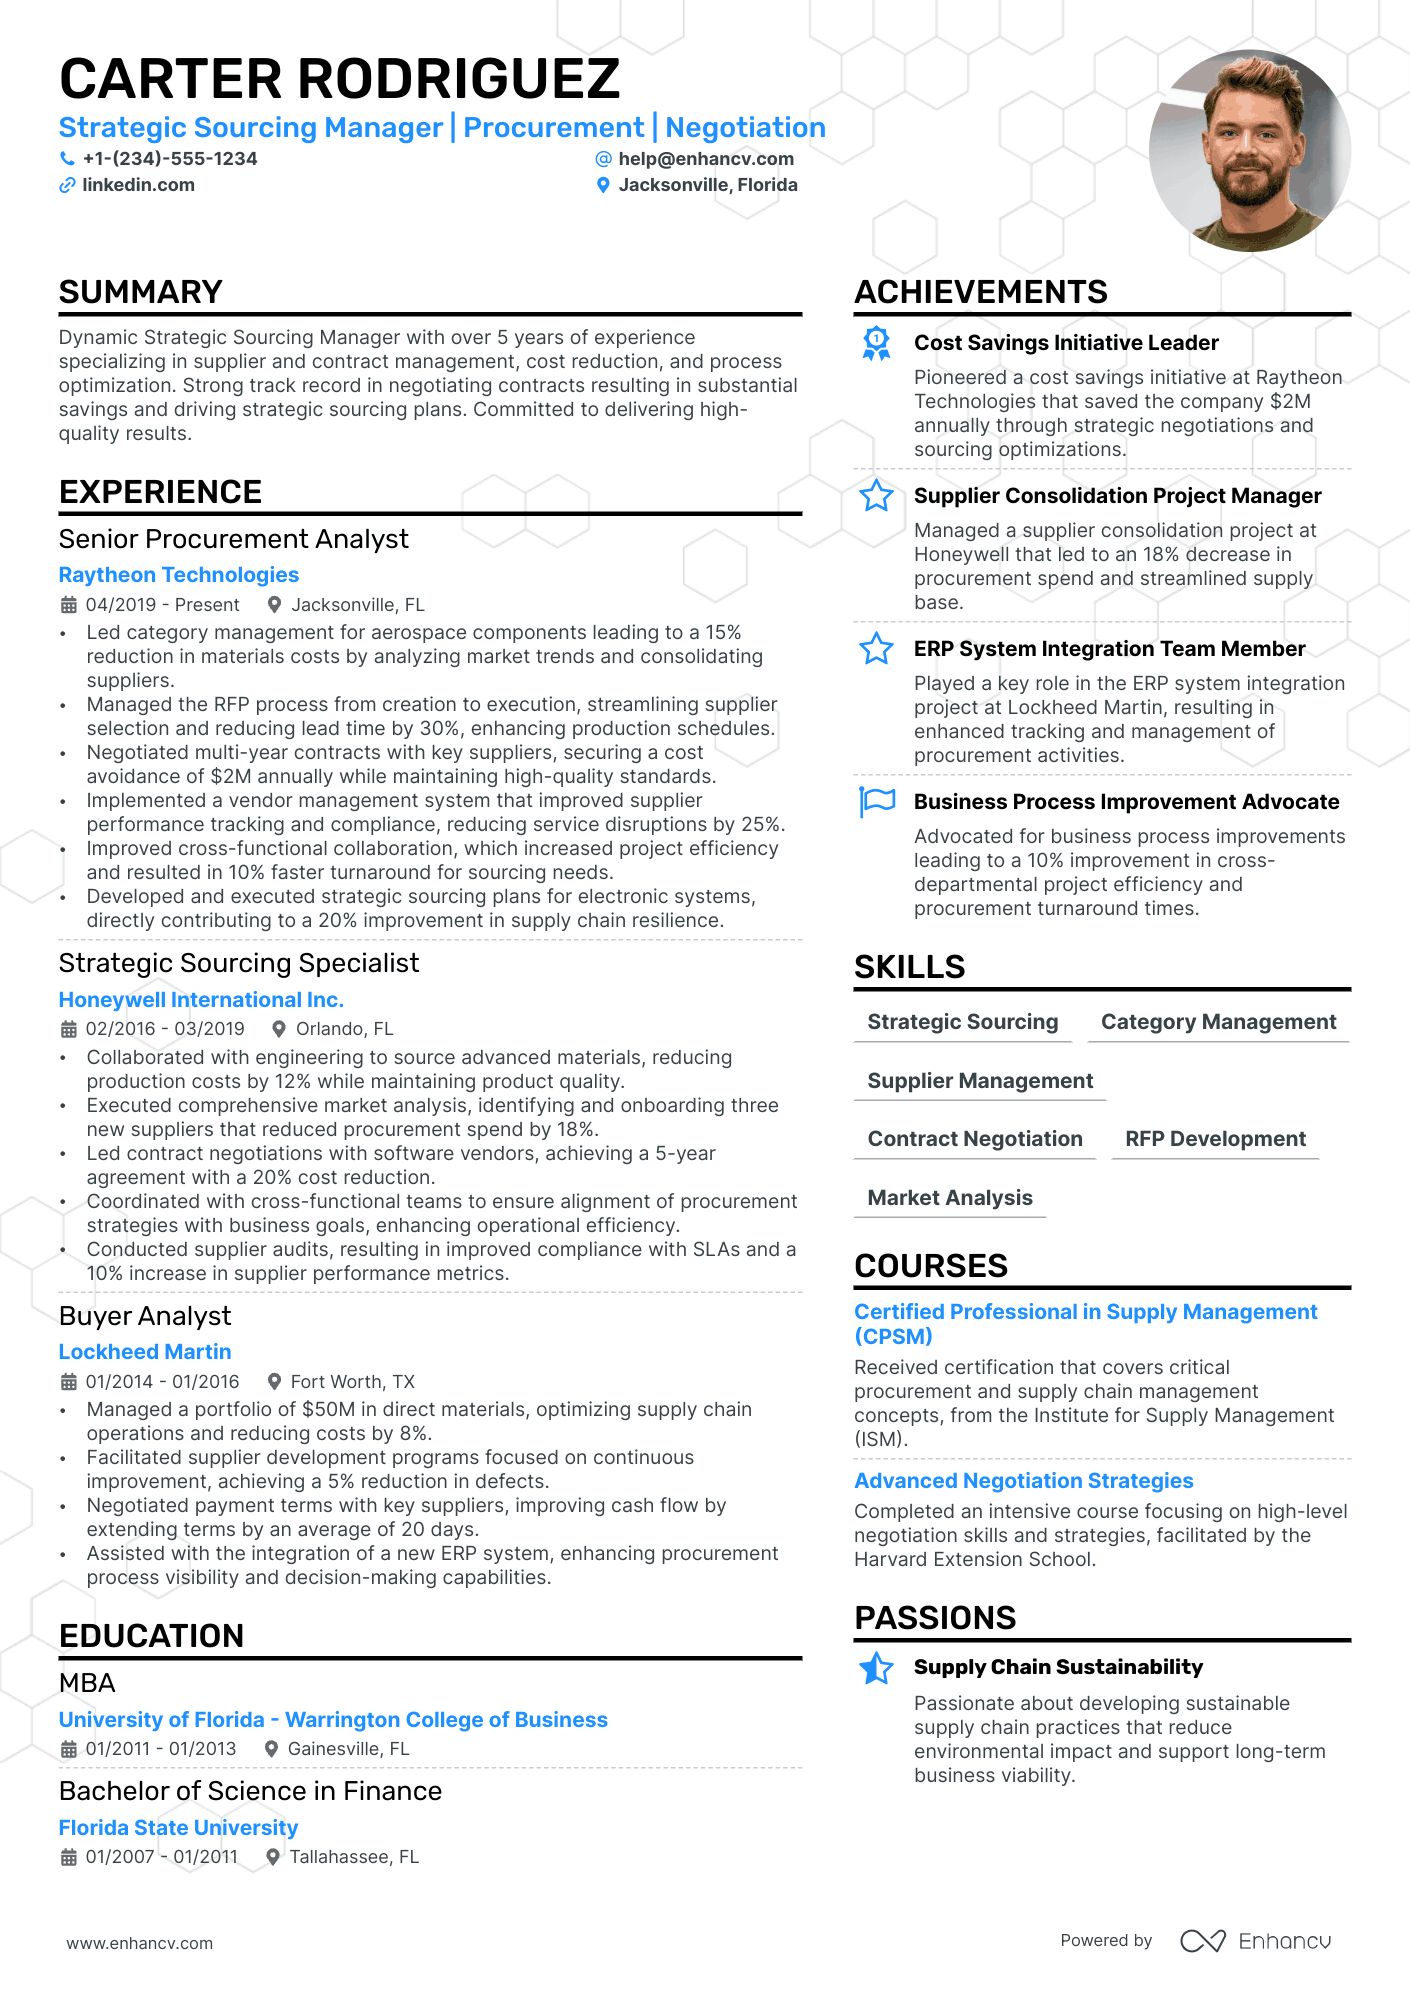 Strategic Sourcing Manager resume example